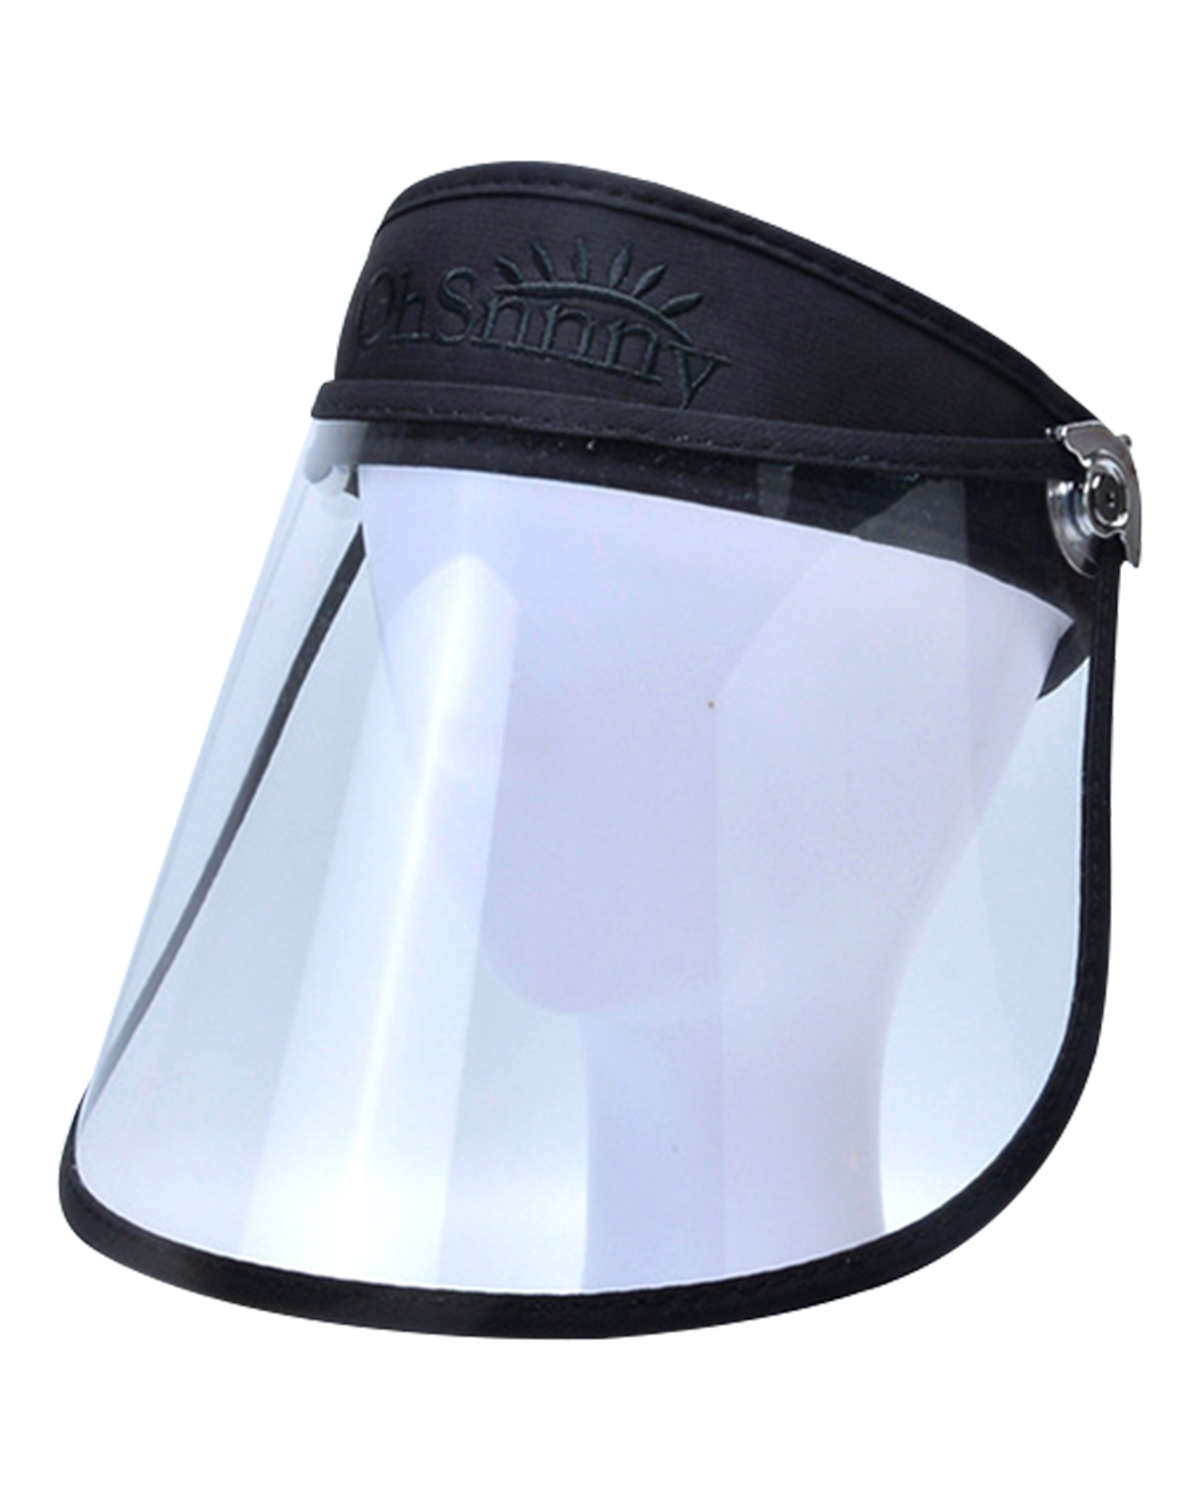 Protection-Safety-Face-Shield-Protective-Cover-Sunshade-Windproof-Anti-Fog-Dustproof-Non-removable-F-1679896-1